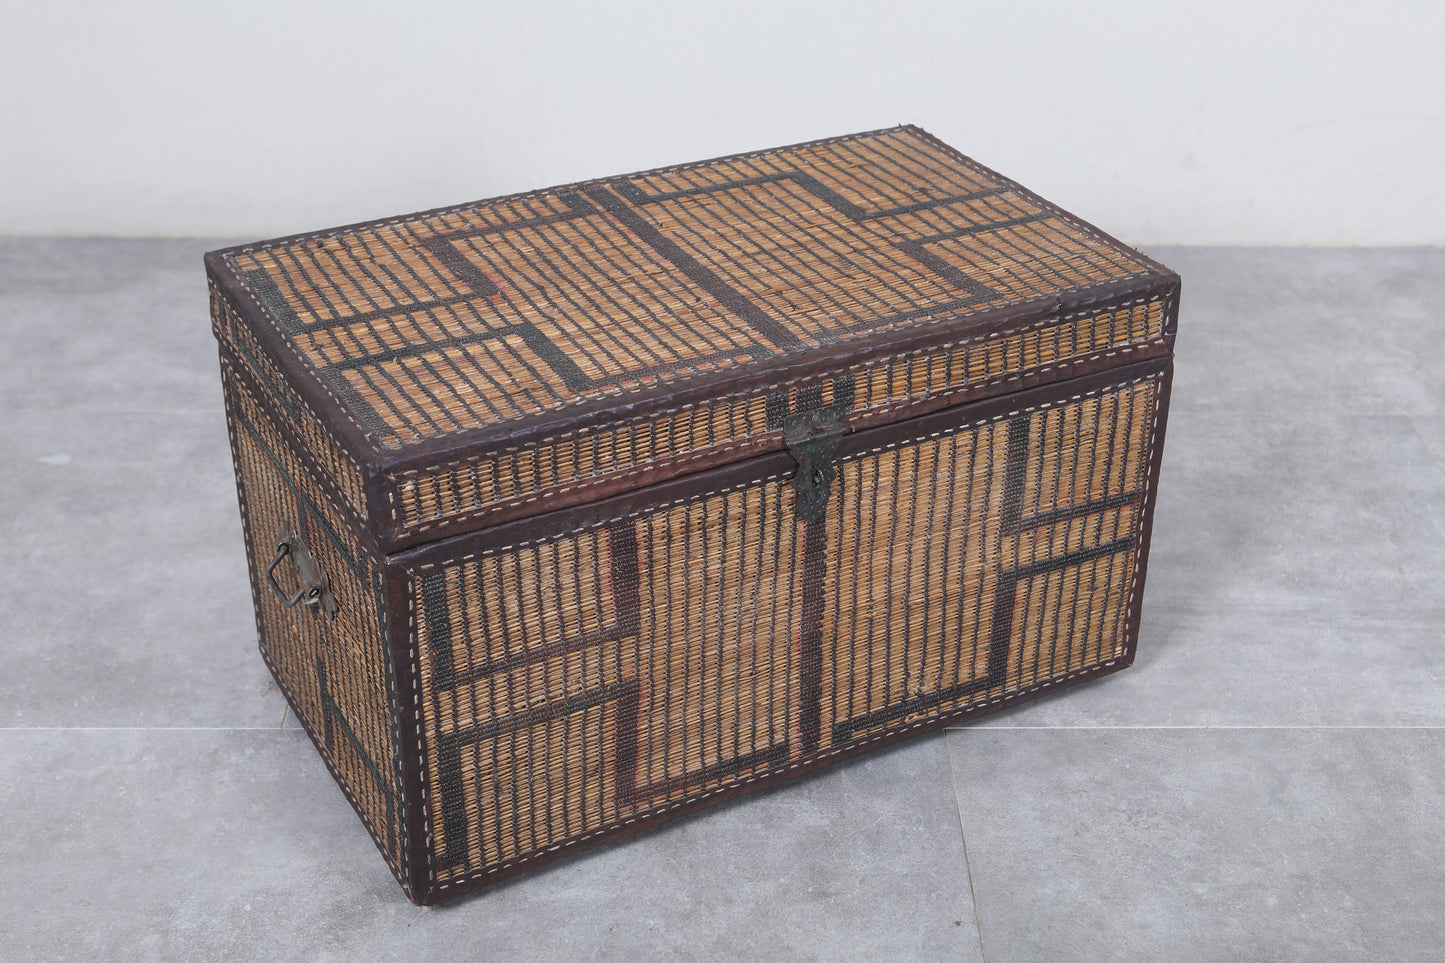 Vintage Moroccan chest  H 16.1 inches x W 27.9 inches x D 16.1 inches